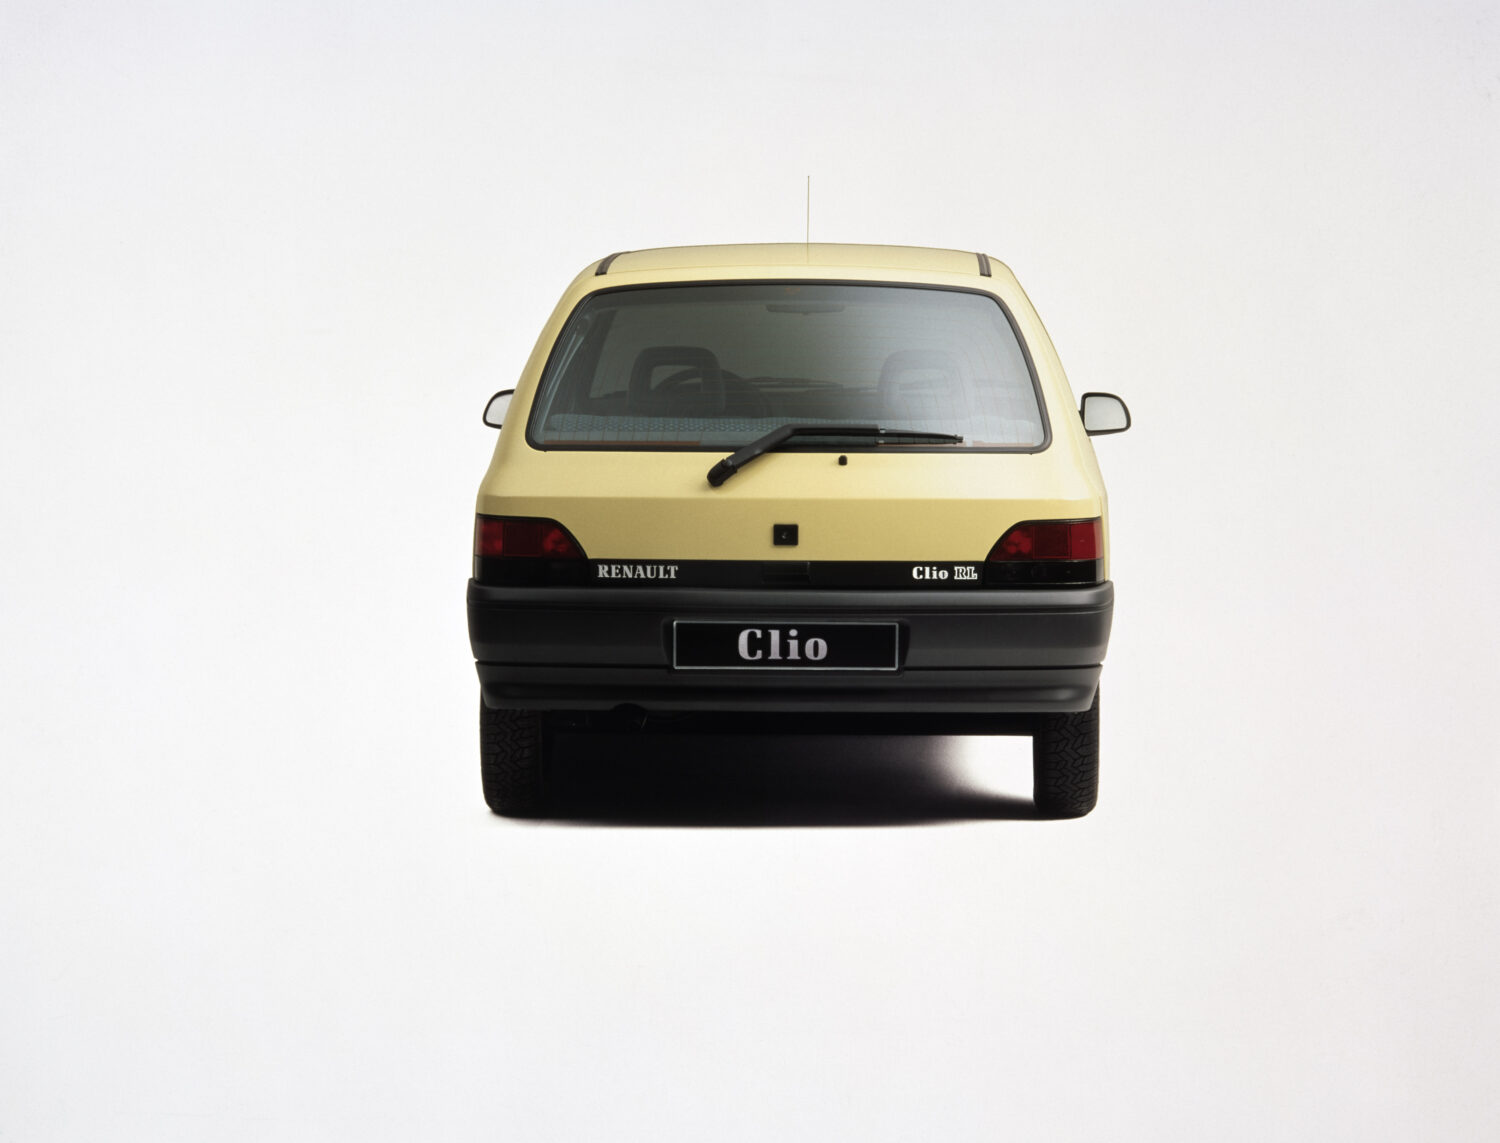 2020 - 30 years of Renault CLIO - Renault CLIO I (1990-1999)